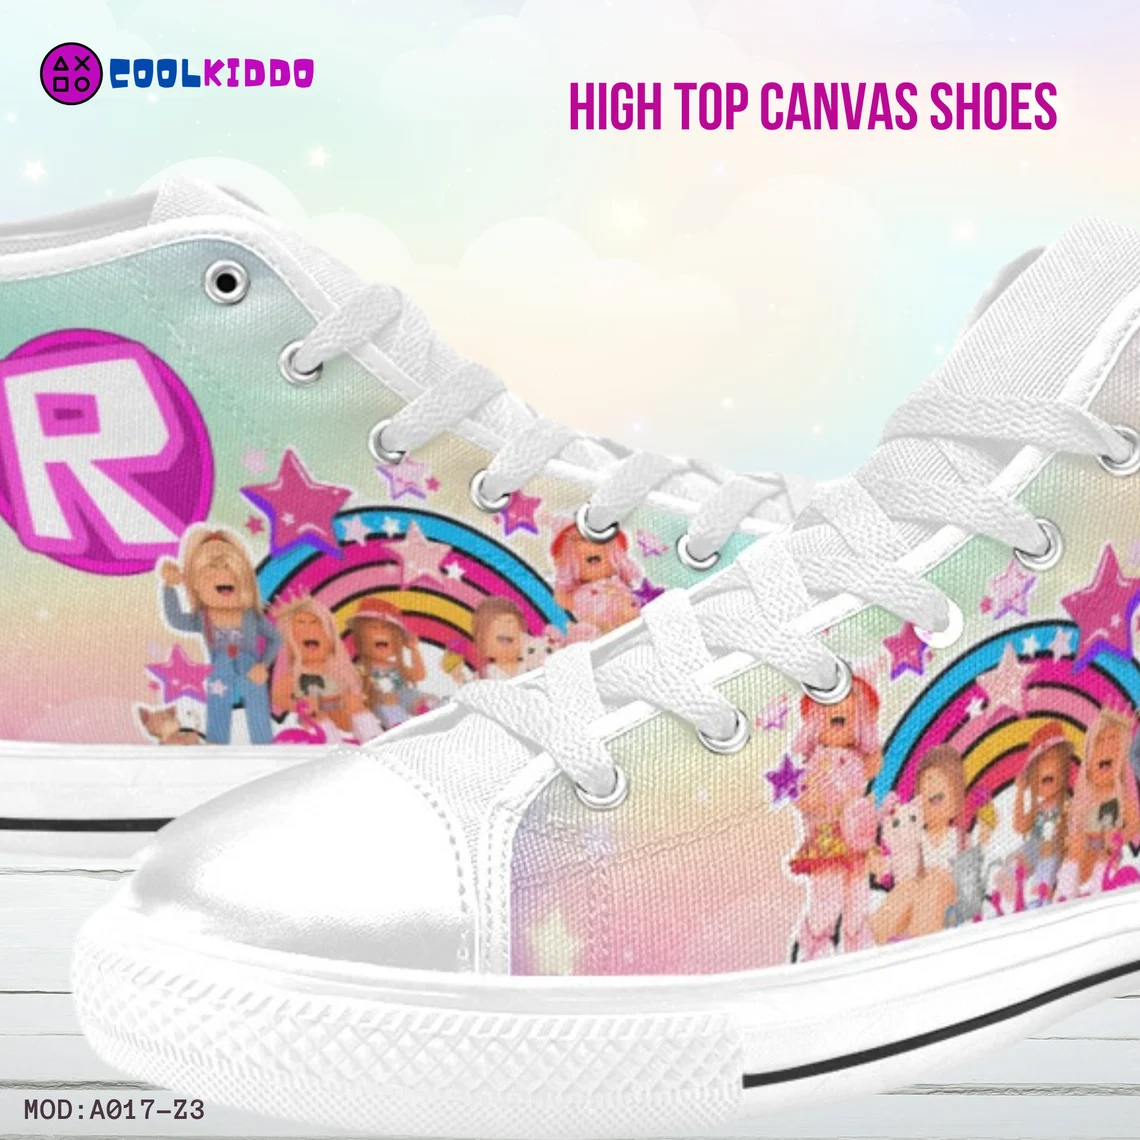 Roblox Girls Video Game High Top Sneakers – Custom Canvas Shoes for Kids/Youth Cool Kiddo 10